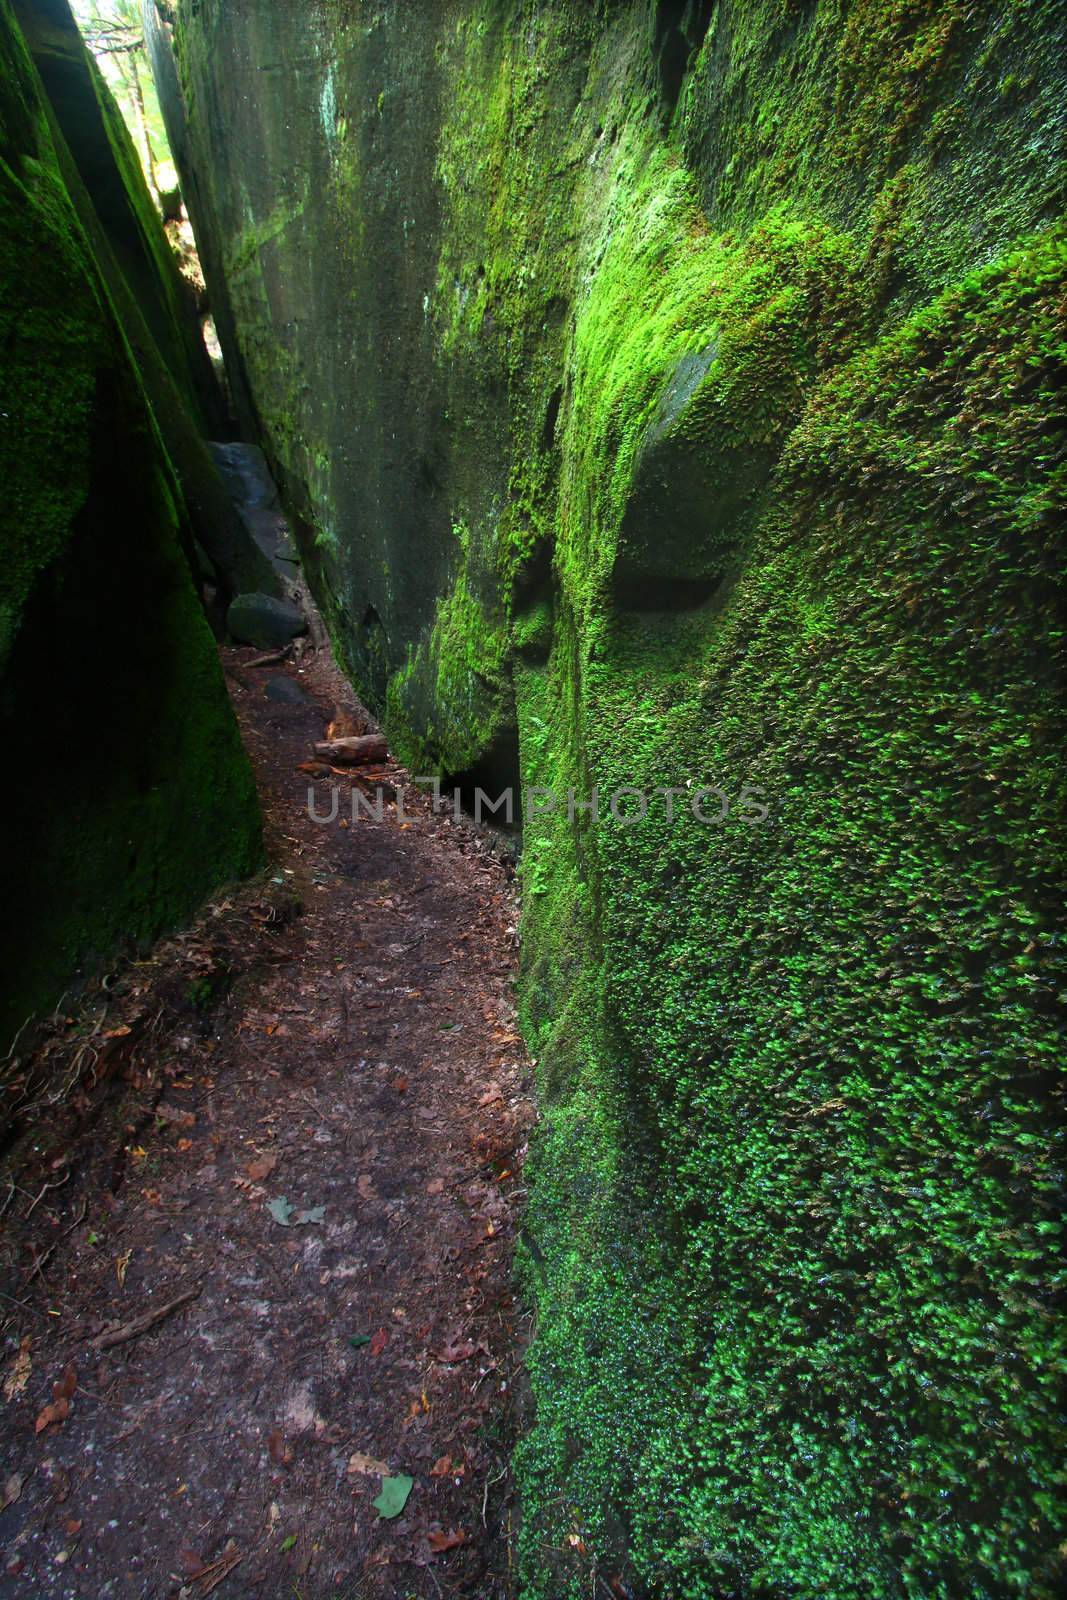 Mossy canyon in Alabama by Wirepec